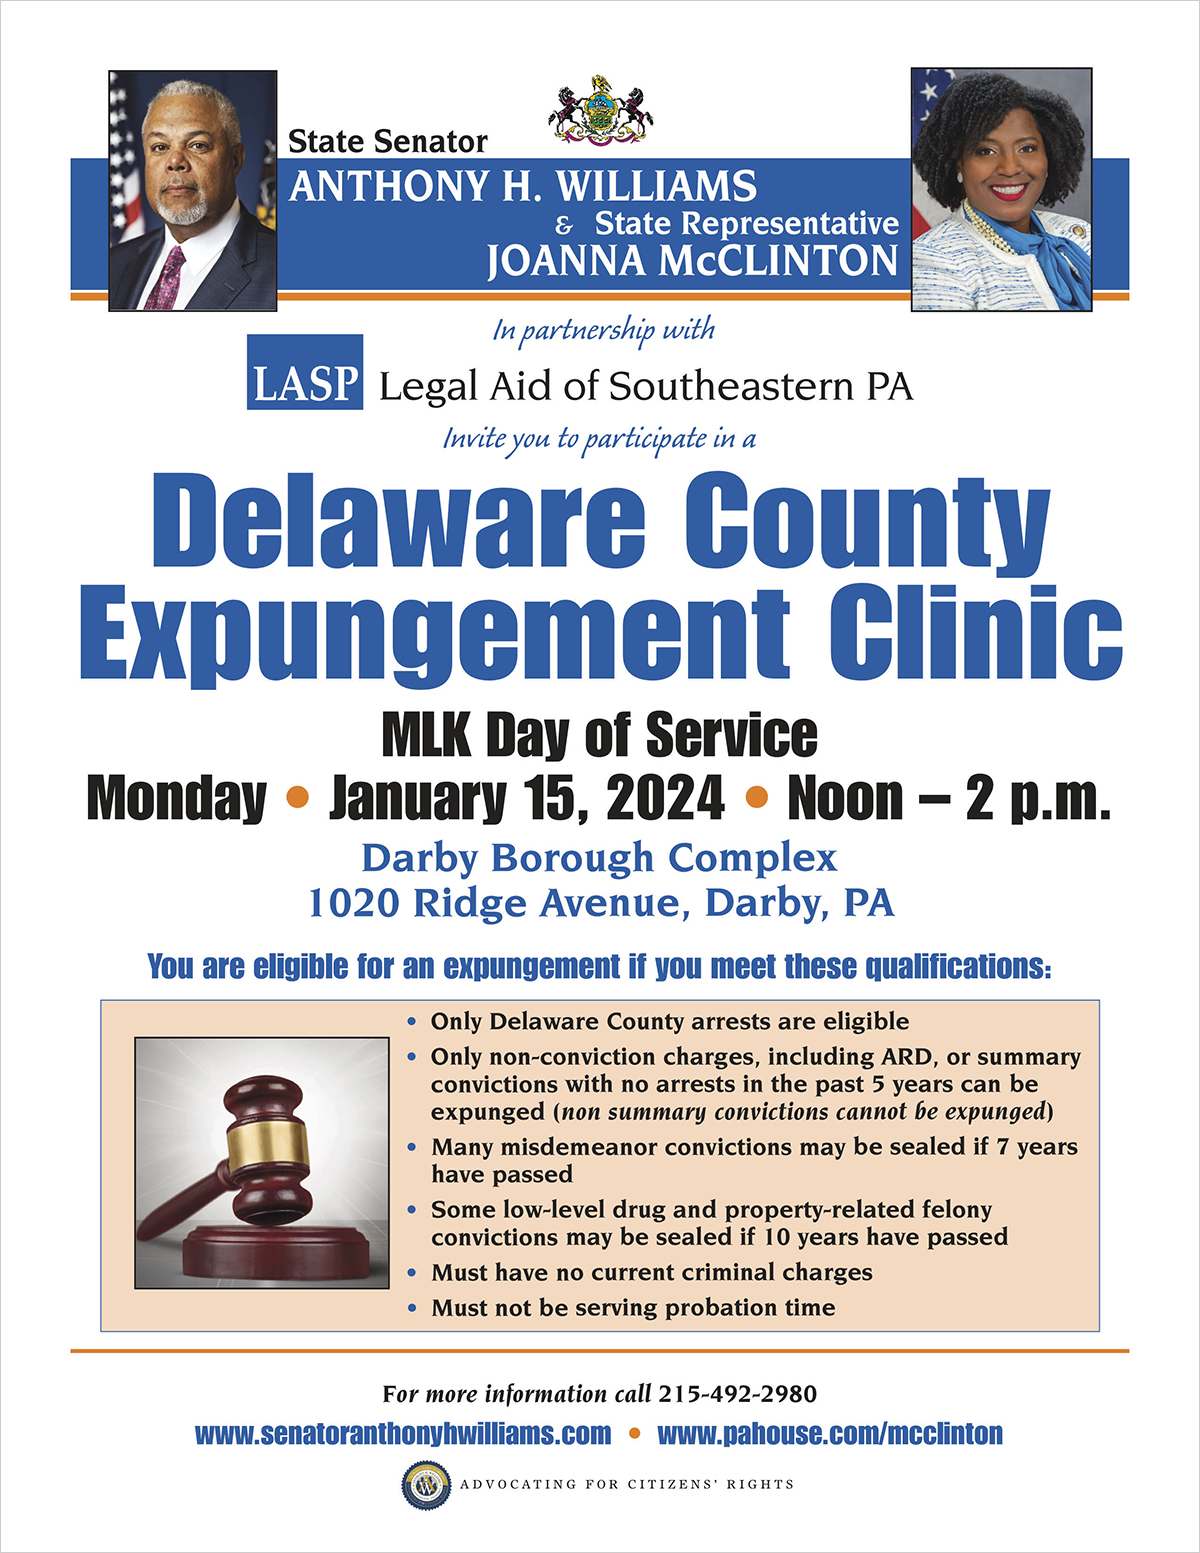 Delaware County Expungement Clinic